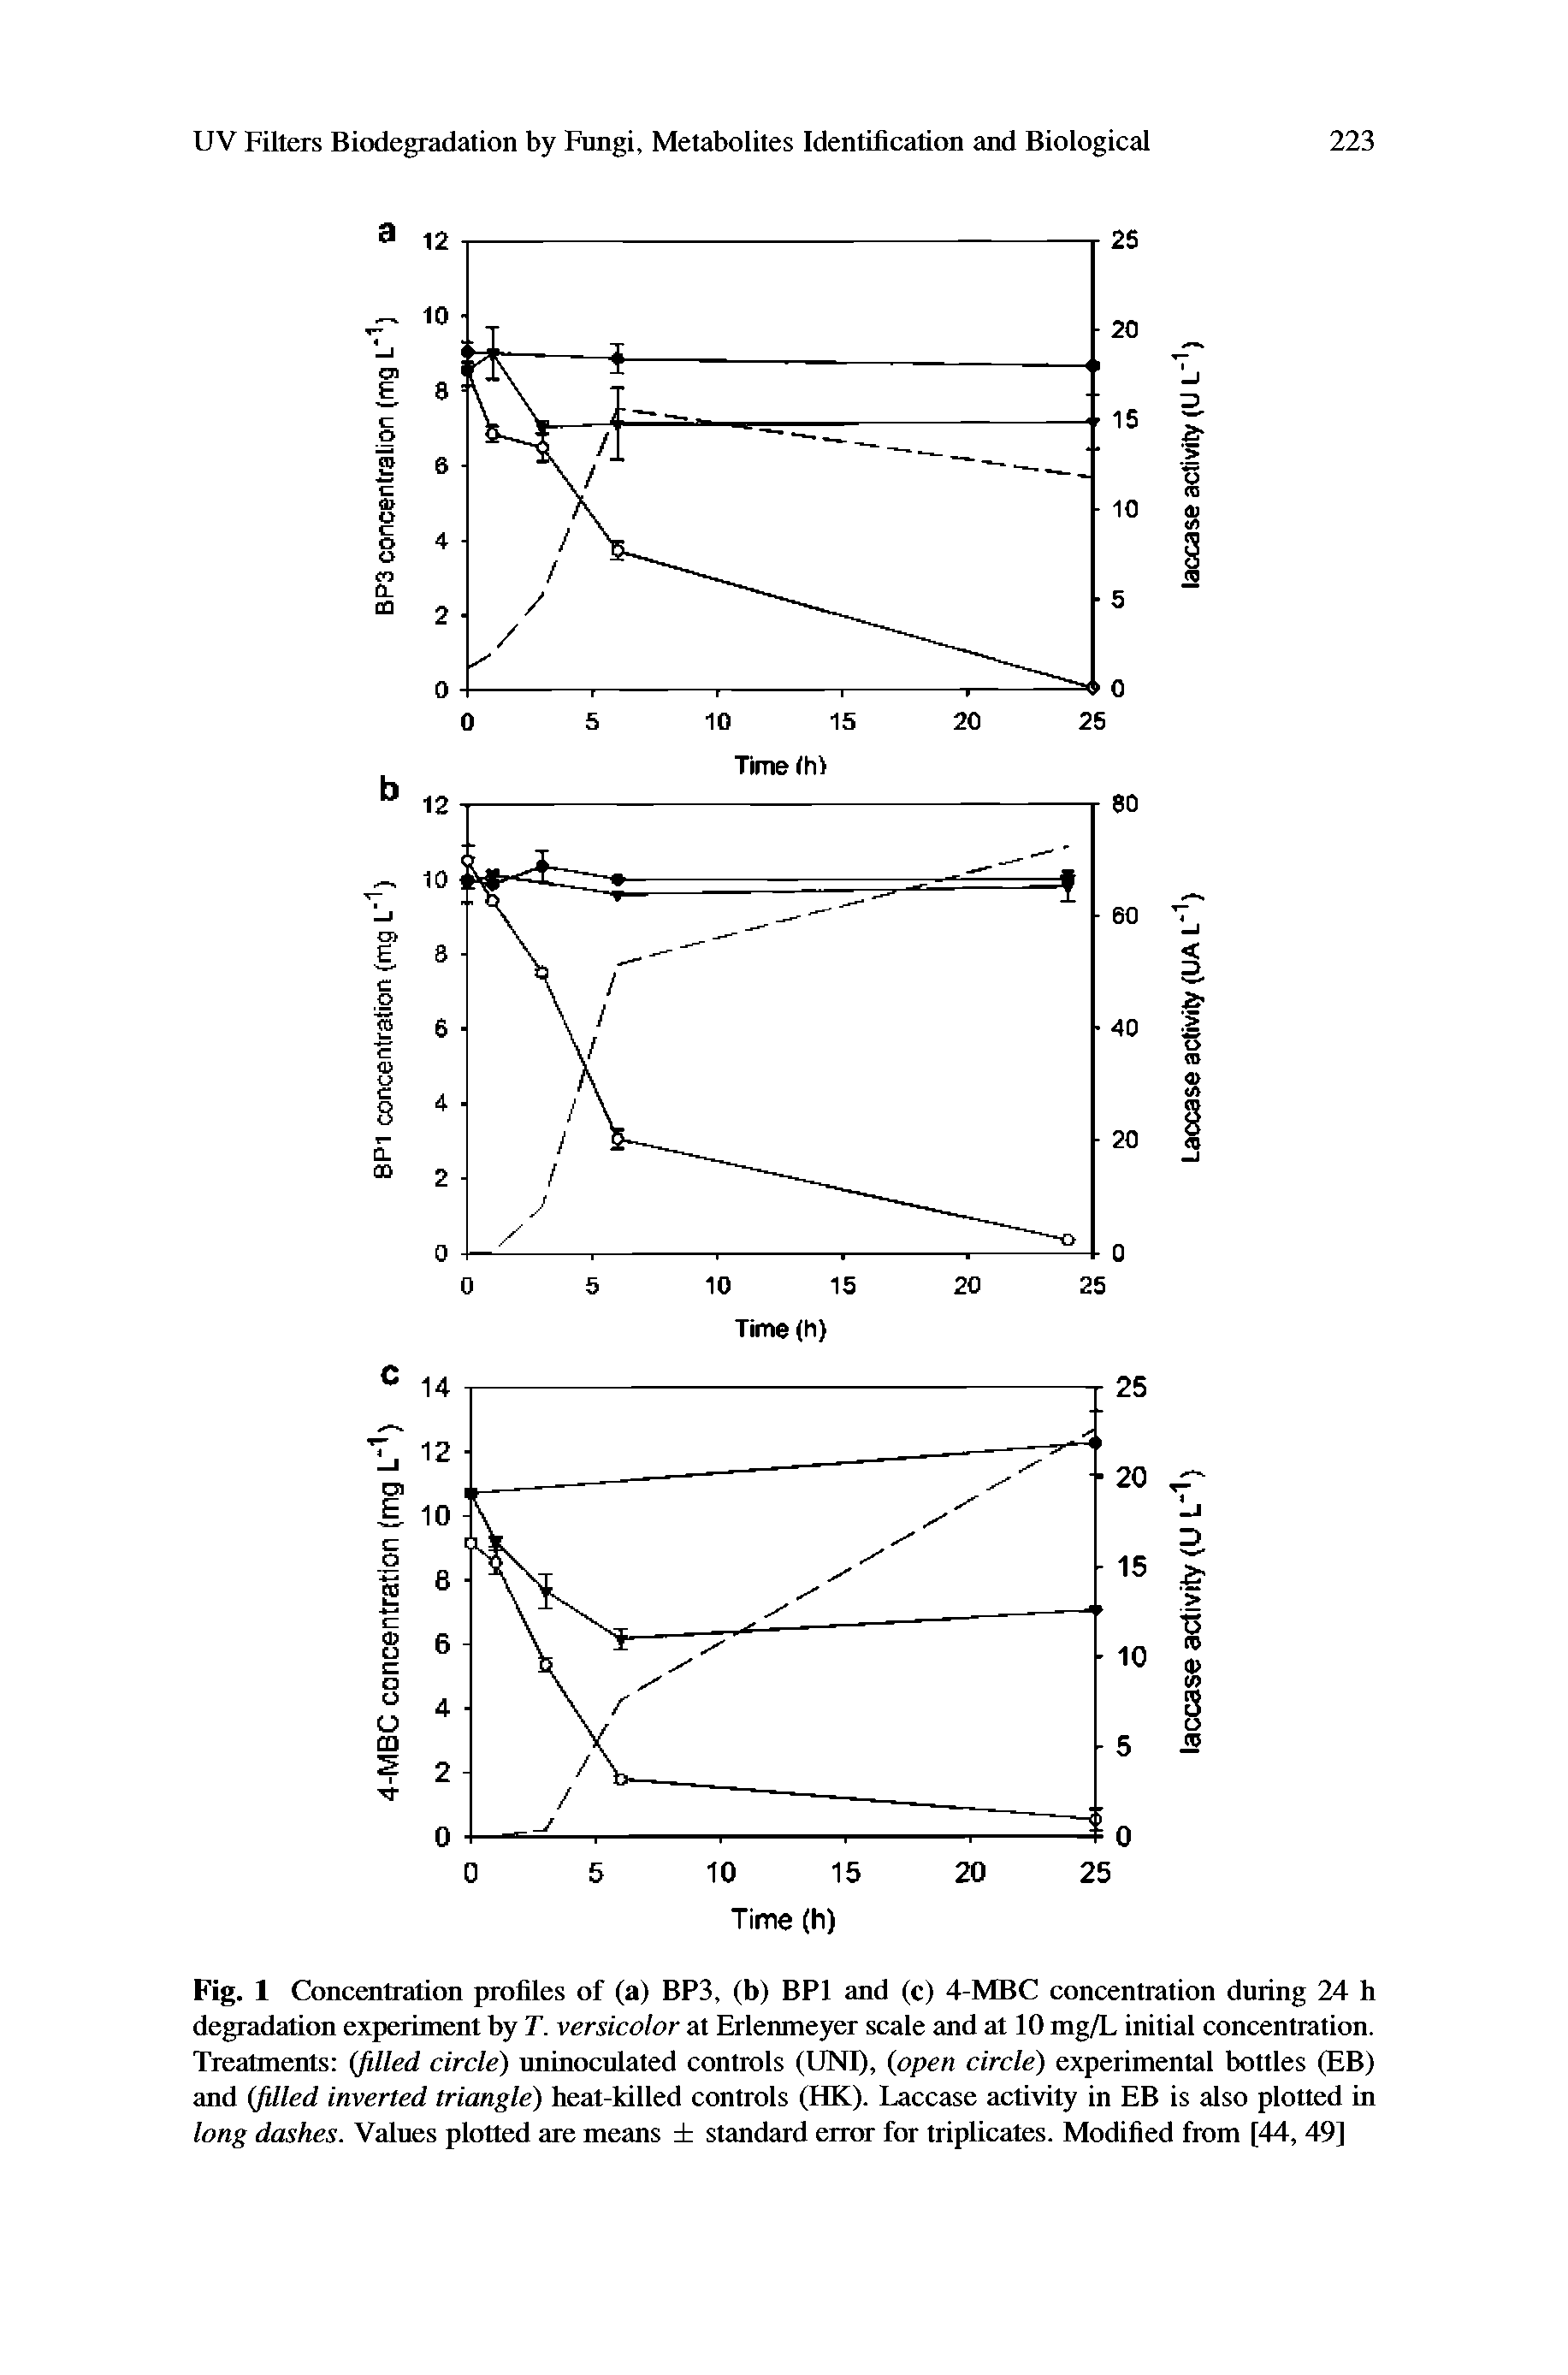 Fig. 1 Concentration profiles of (a) BP3, (b) BP1 and (c) 4-MBC concentration during 24 h degradation experiment by T. versicolor at Erlenmeyer scale and at 10 mg/L initial concentration. Treatments (filled circle) uninoculated controls (UNI), (open circle) experimental bottles (EB) and (filled inverted triangle) heat-killed controls (HK). Laccase activity in EB is also plotted in long dashes. Values plotted are means standard error for triplicates. Modified from [44, 49]...